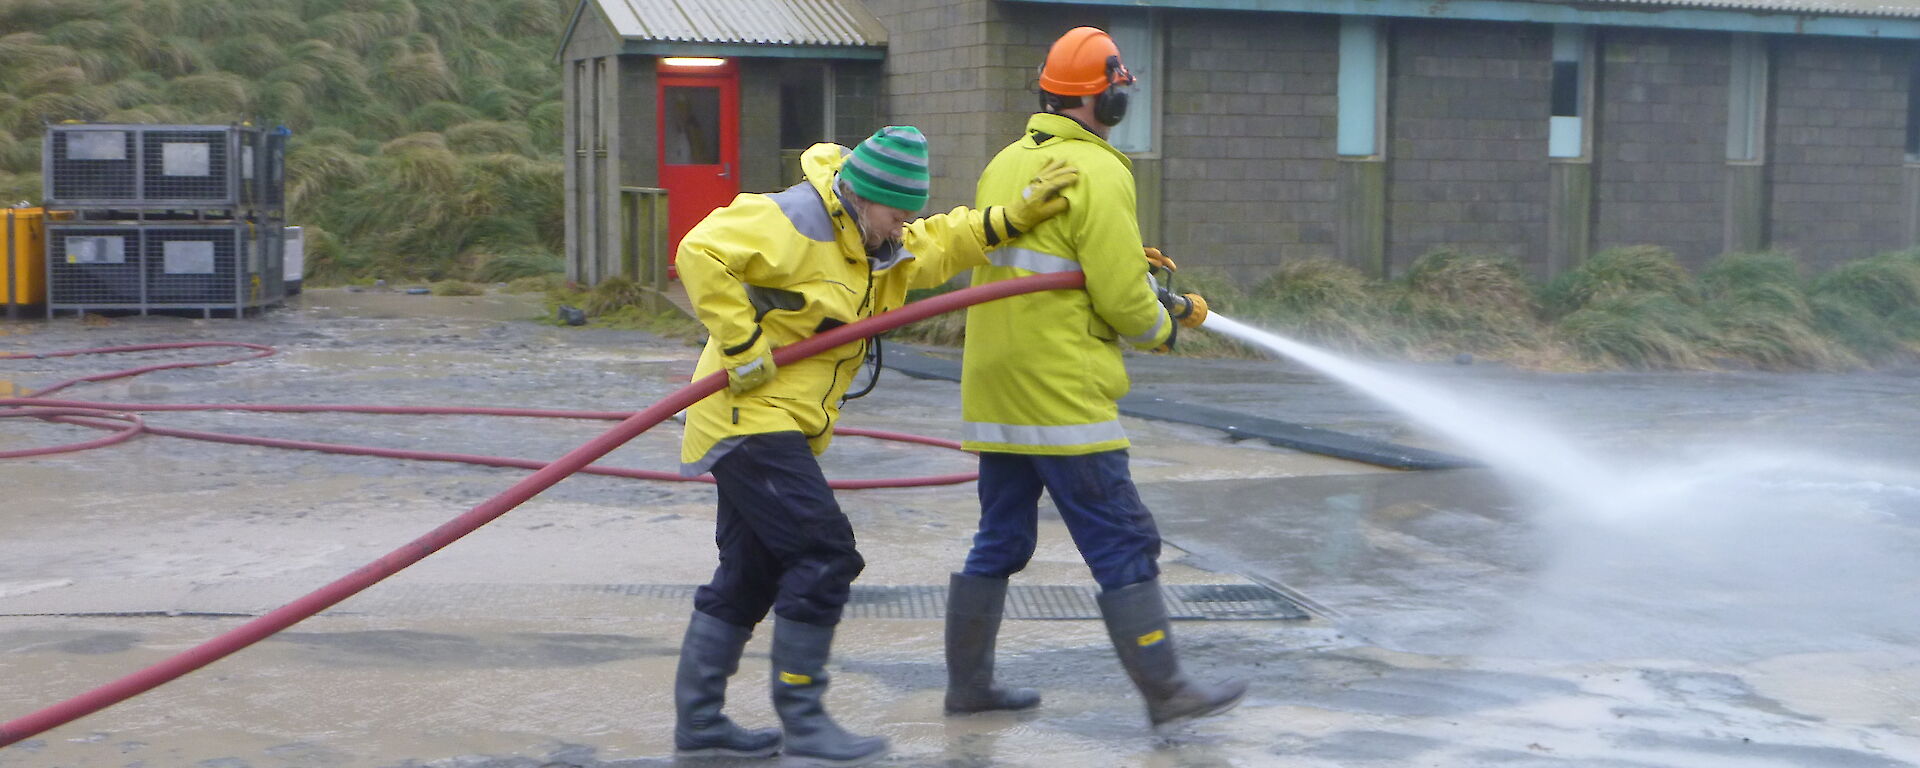 Marion and Nick using a fire hose and spraying water